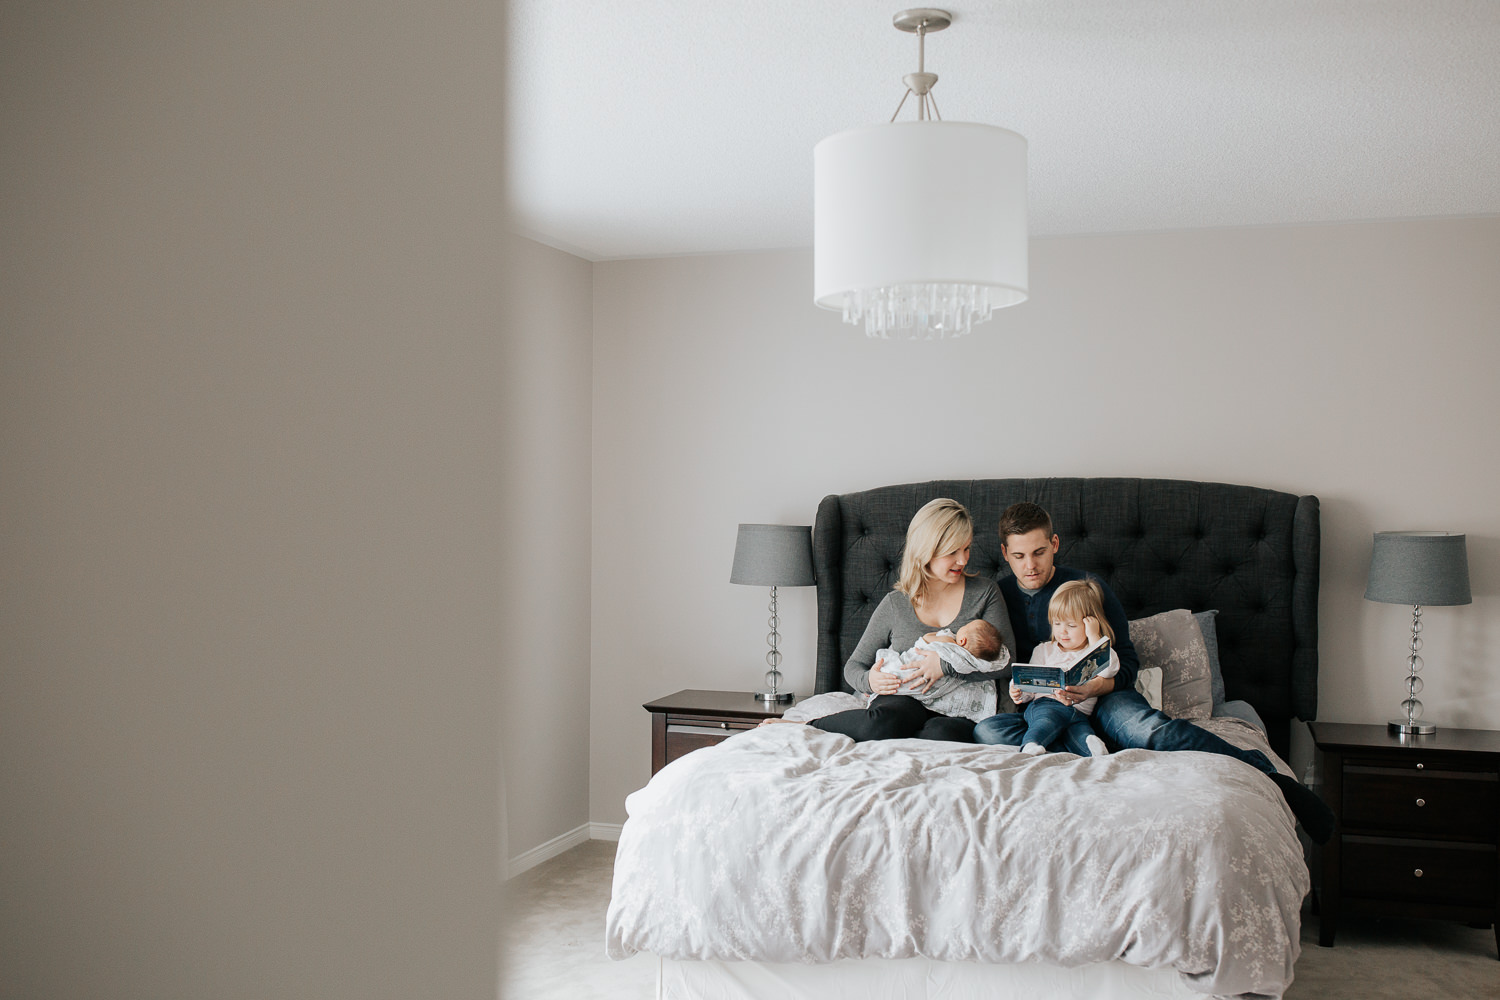  family of four sitting on bed, mom holding 2 week old baby boy 2 year old girl sitting on dad's lap reading story book - York Region Lifestyle Photography